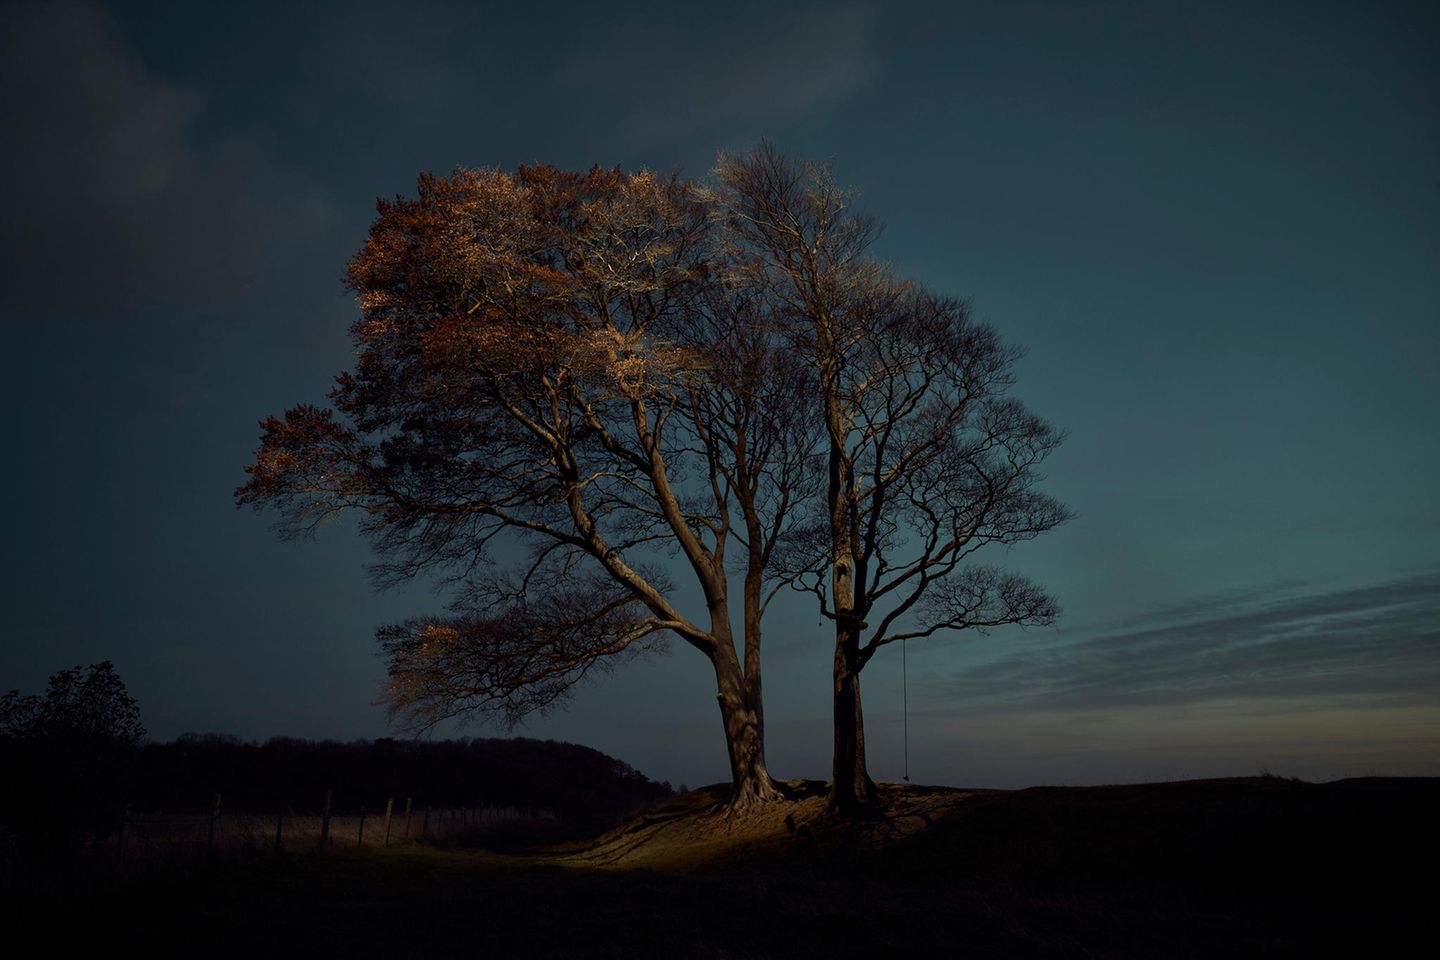 Image Name: Tree 3  Photographer Name: Gareth Iwan Jones  Year: 2022  Image Description: <p>Beech Tree, Autumn</p>  Series Name: Tree  Series Description: This project was born of the Covid-19 lockdowns, and the impact upon my work as a portrait photographer. Inspired by my home county of Wiltshire, where the distinctive landscape features many knolls with lone trees raised above the horizon line. Unable to photograph people, I turned to my love of trees. I wondered if it was possible to take a unique portrait of these quiet giants. I chose to photograph against dusk skies and lit the trees with drones to create an otherworldly impression. As lockdowns took hold, so did this project. I started looking into every field and up every hill for aesthetically interesting treescapes. While many people discovered the joys of walking in nature during the lockdowns, once the sun had set it was just me, the trees and the darkness, which was an experience that at first terrified me but with time I began to relish.